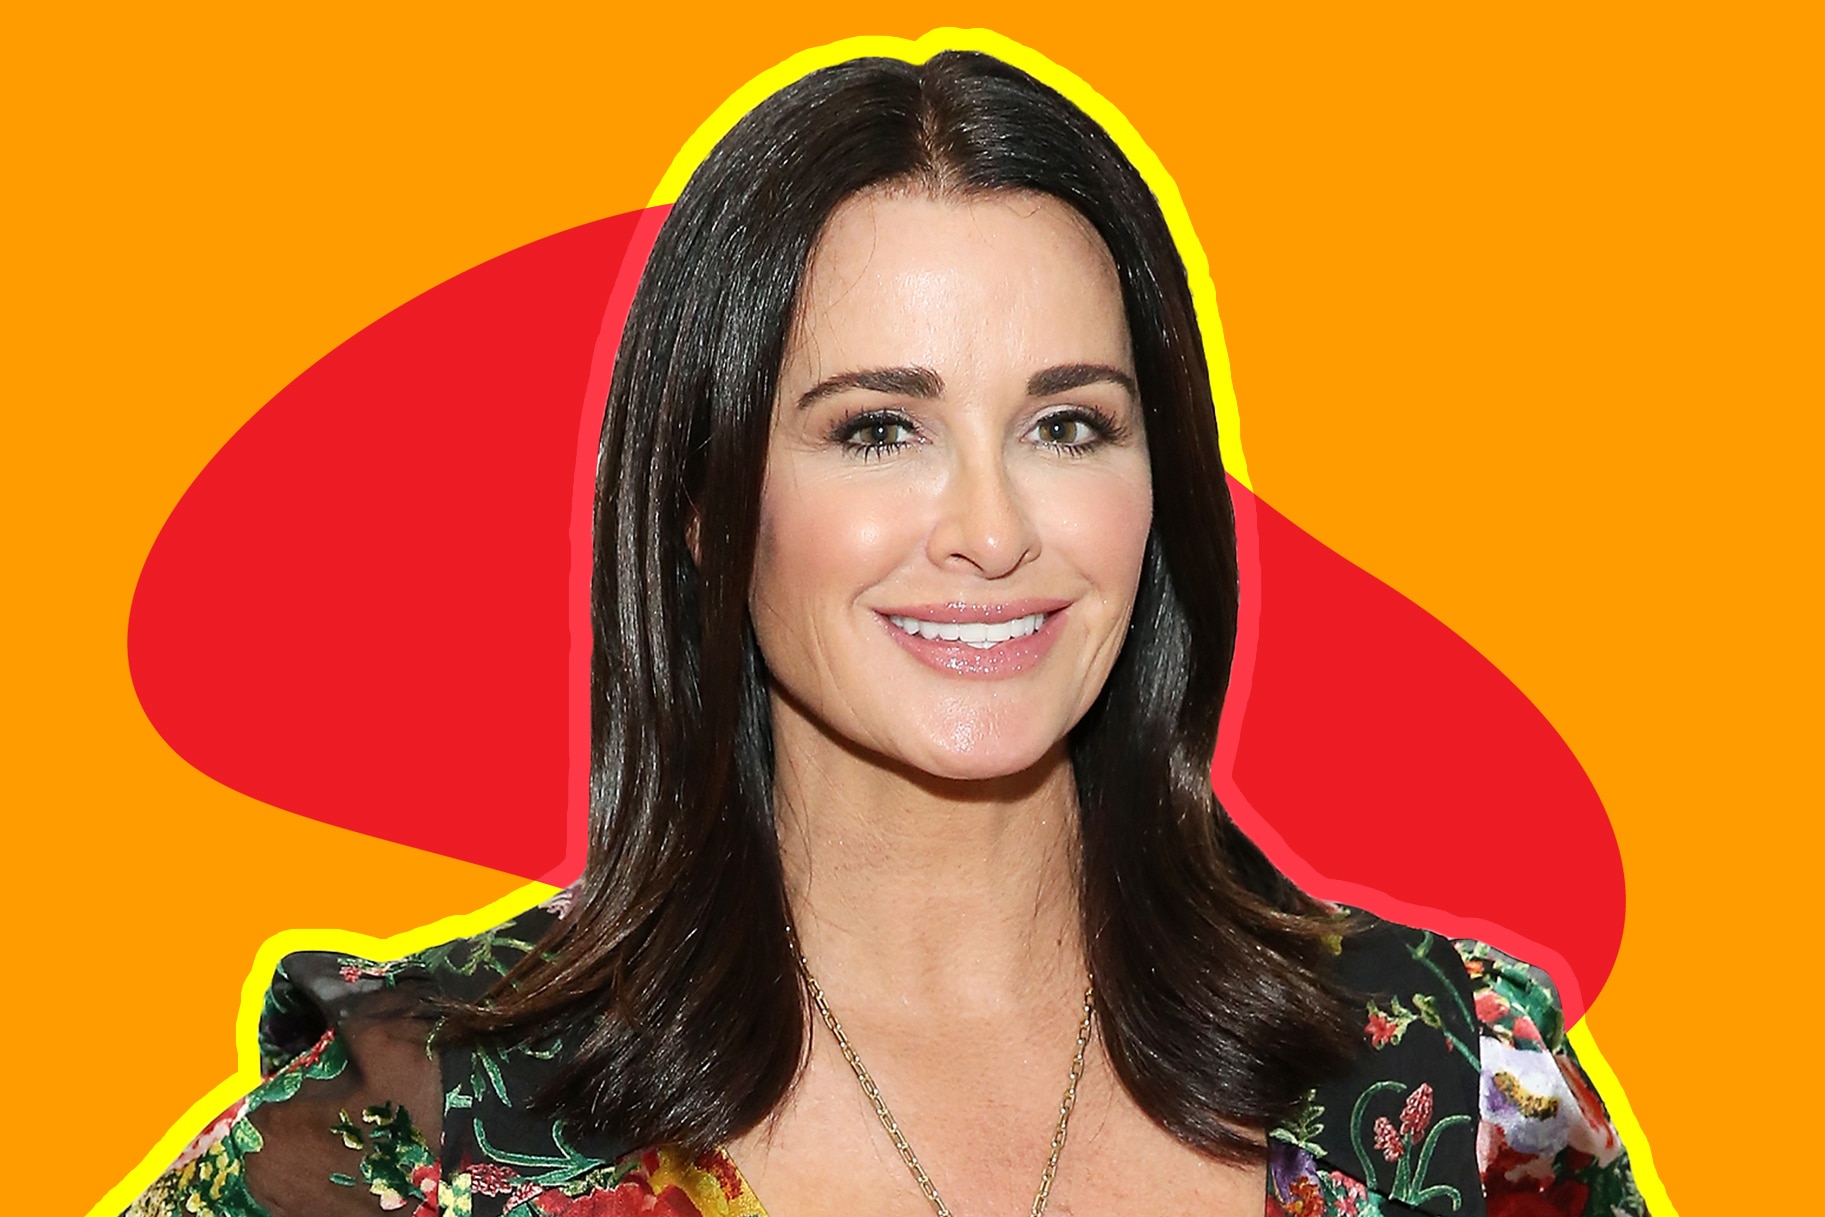 Kyle Richards' Super Curly Hair and Neon Reunion Dress Are '80s G...